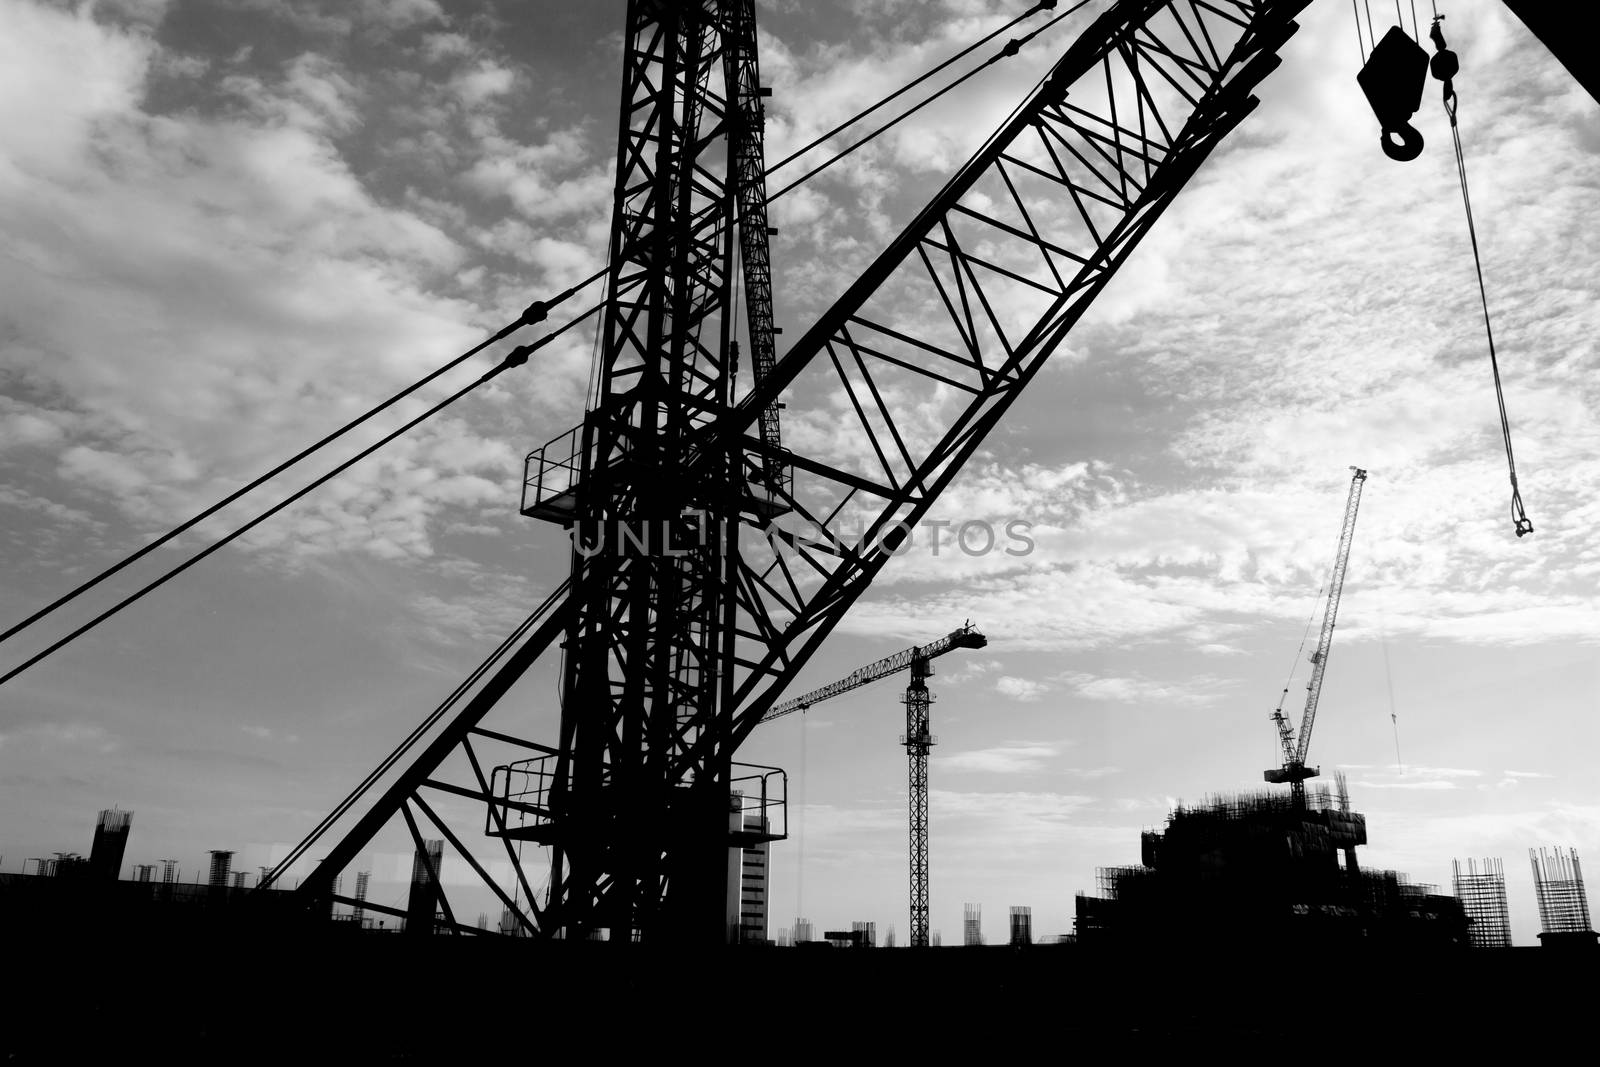 The building construction site silhouettes. by ronnarong